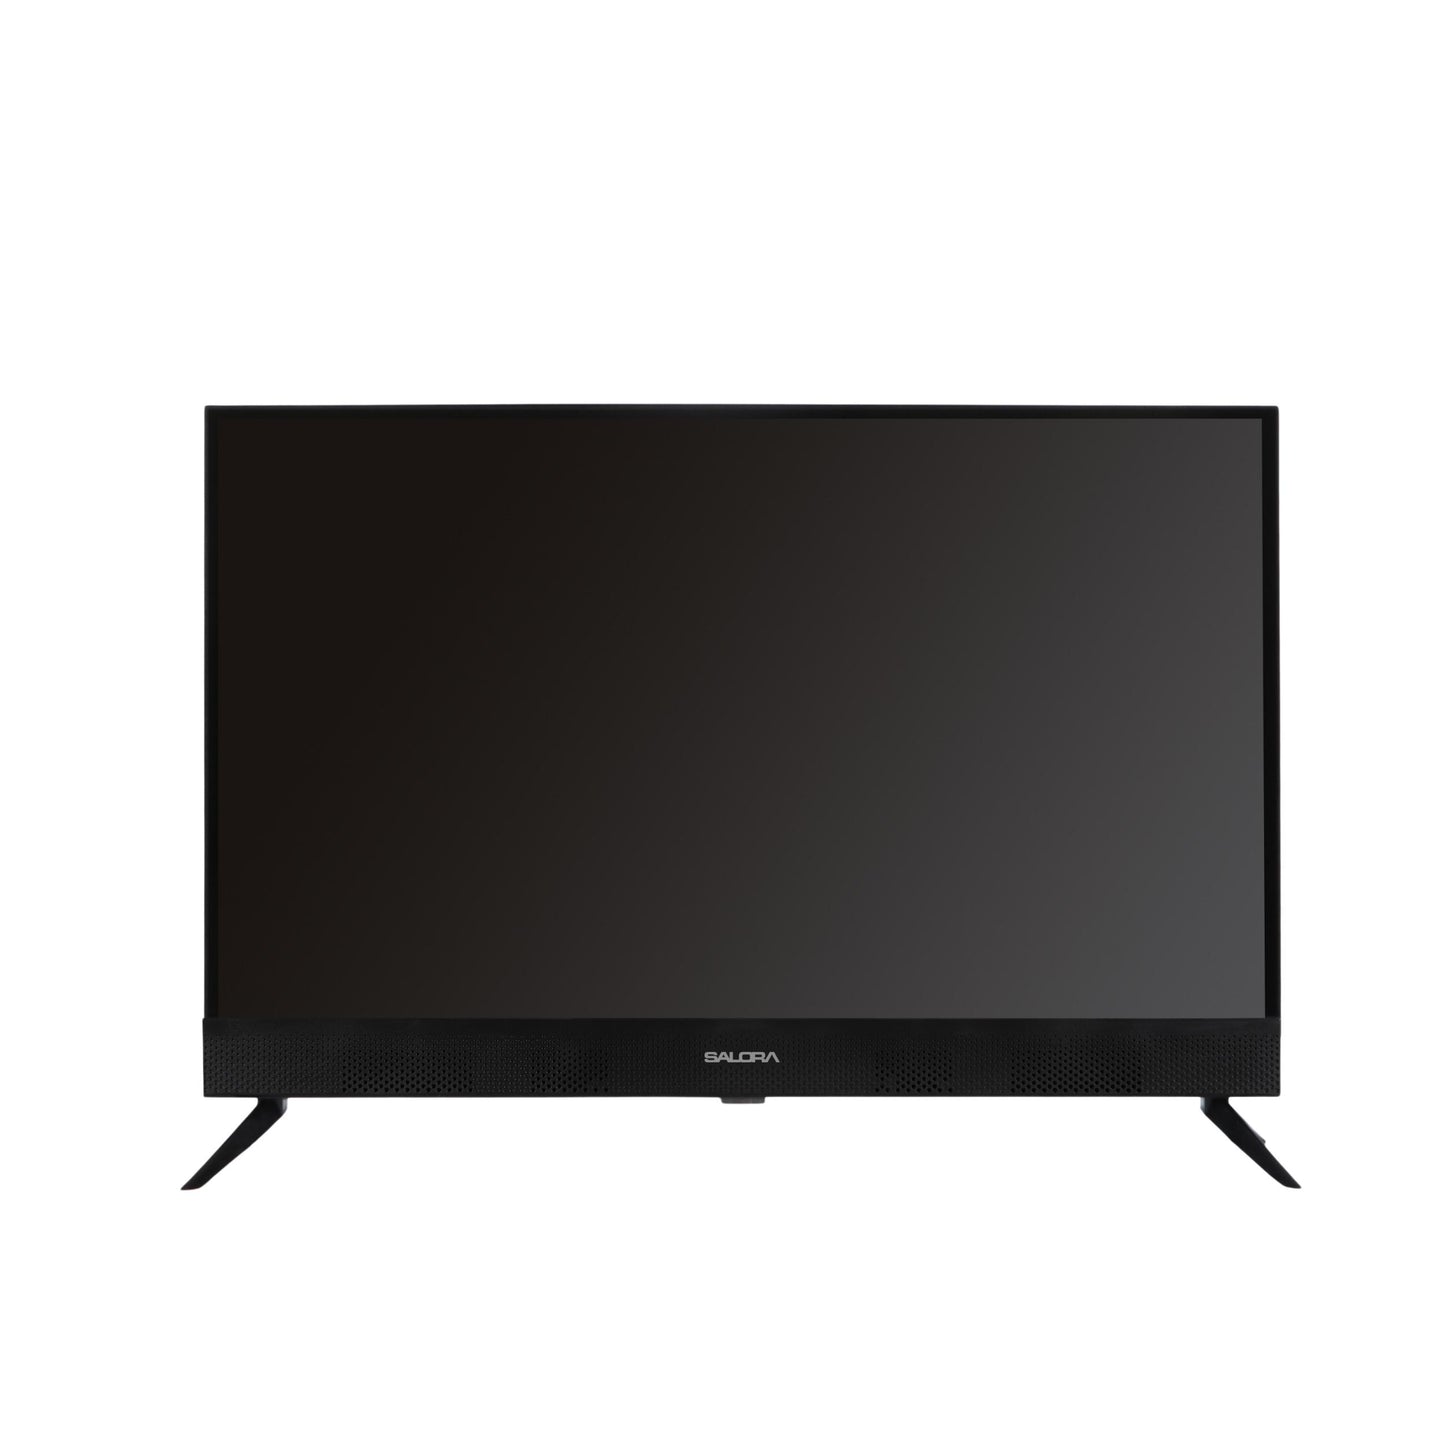 Salora 80 cm (32 inches) HD Ready Smart LED TV with In-built Sound Bar, SLV-4324 SW (Black)